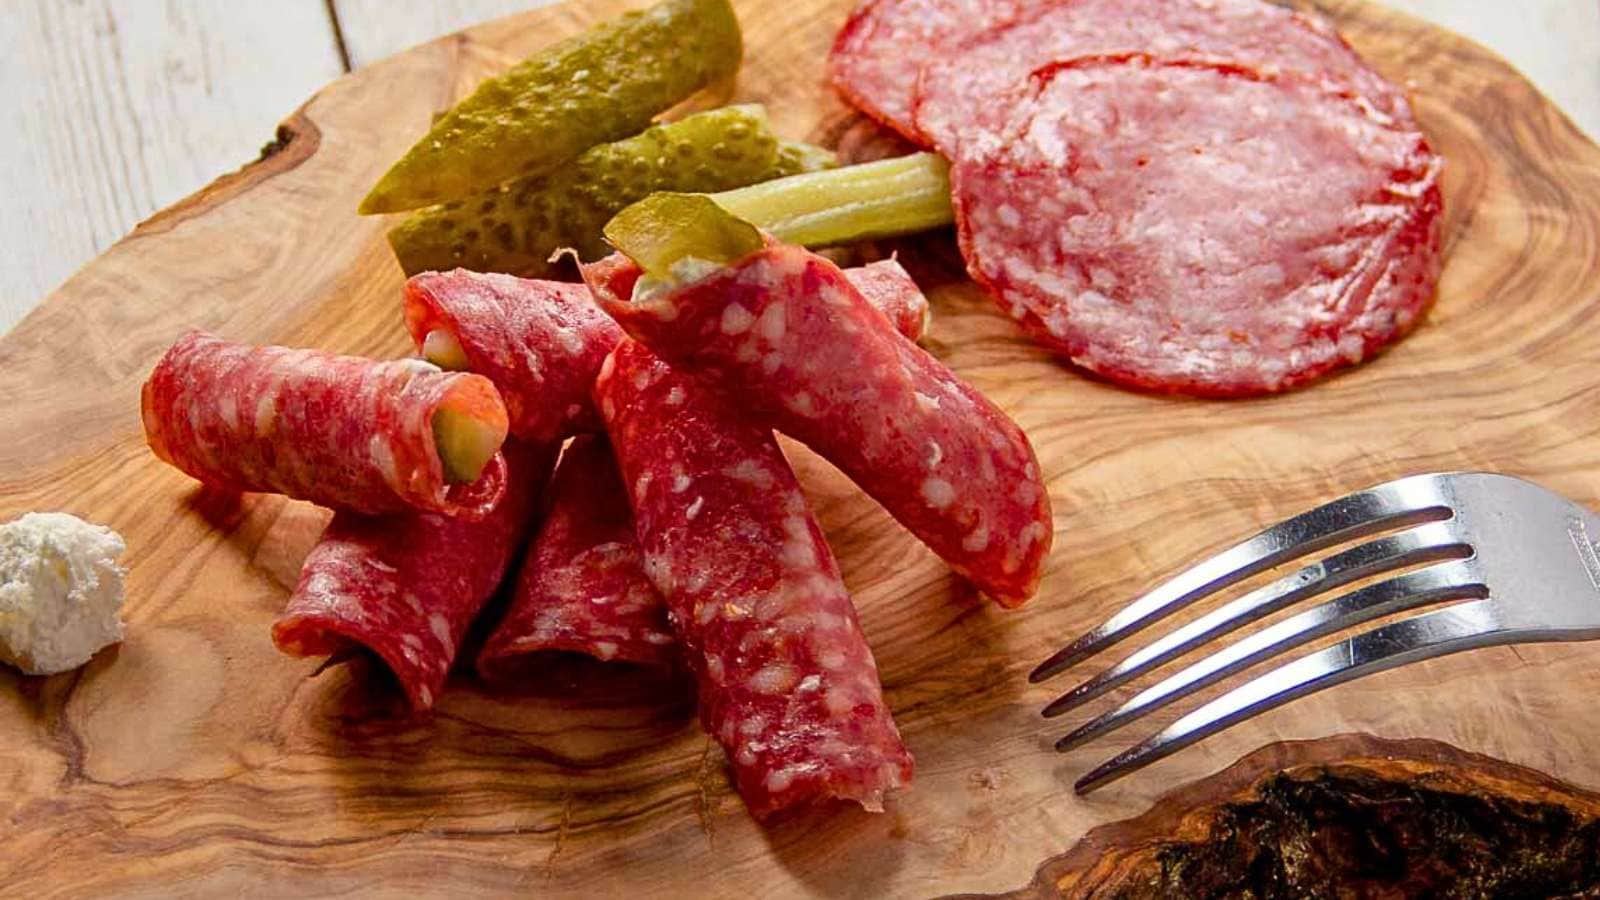 Salami Roll-Up recipe by Cheerful Cook.